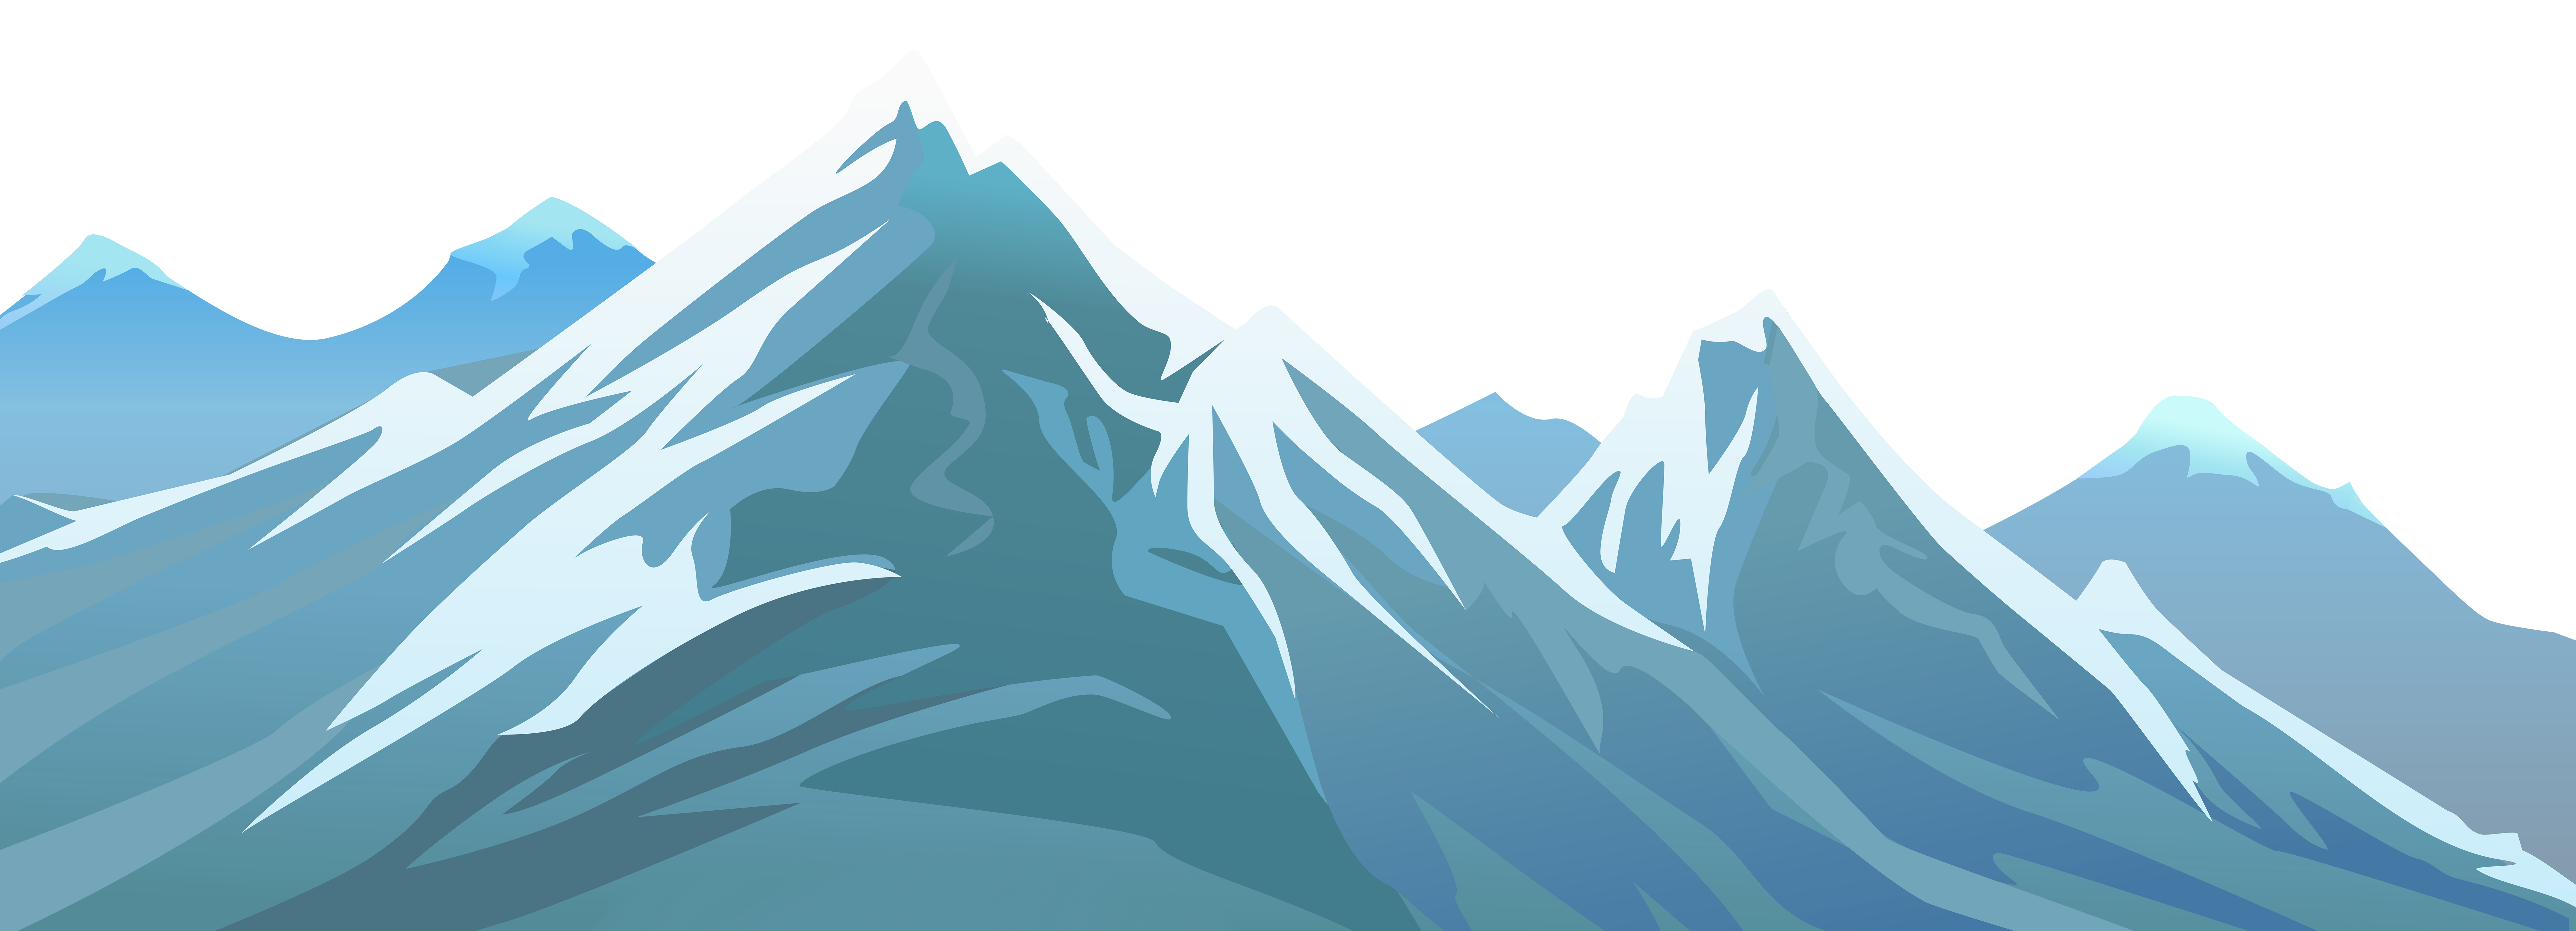 free clipart images mountains - photo #20